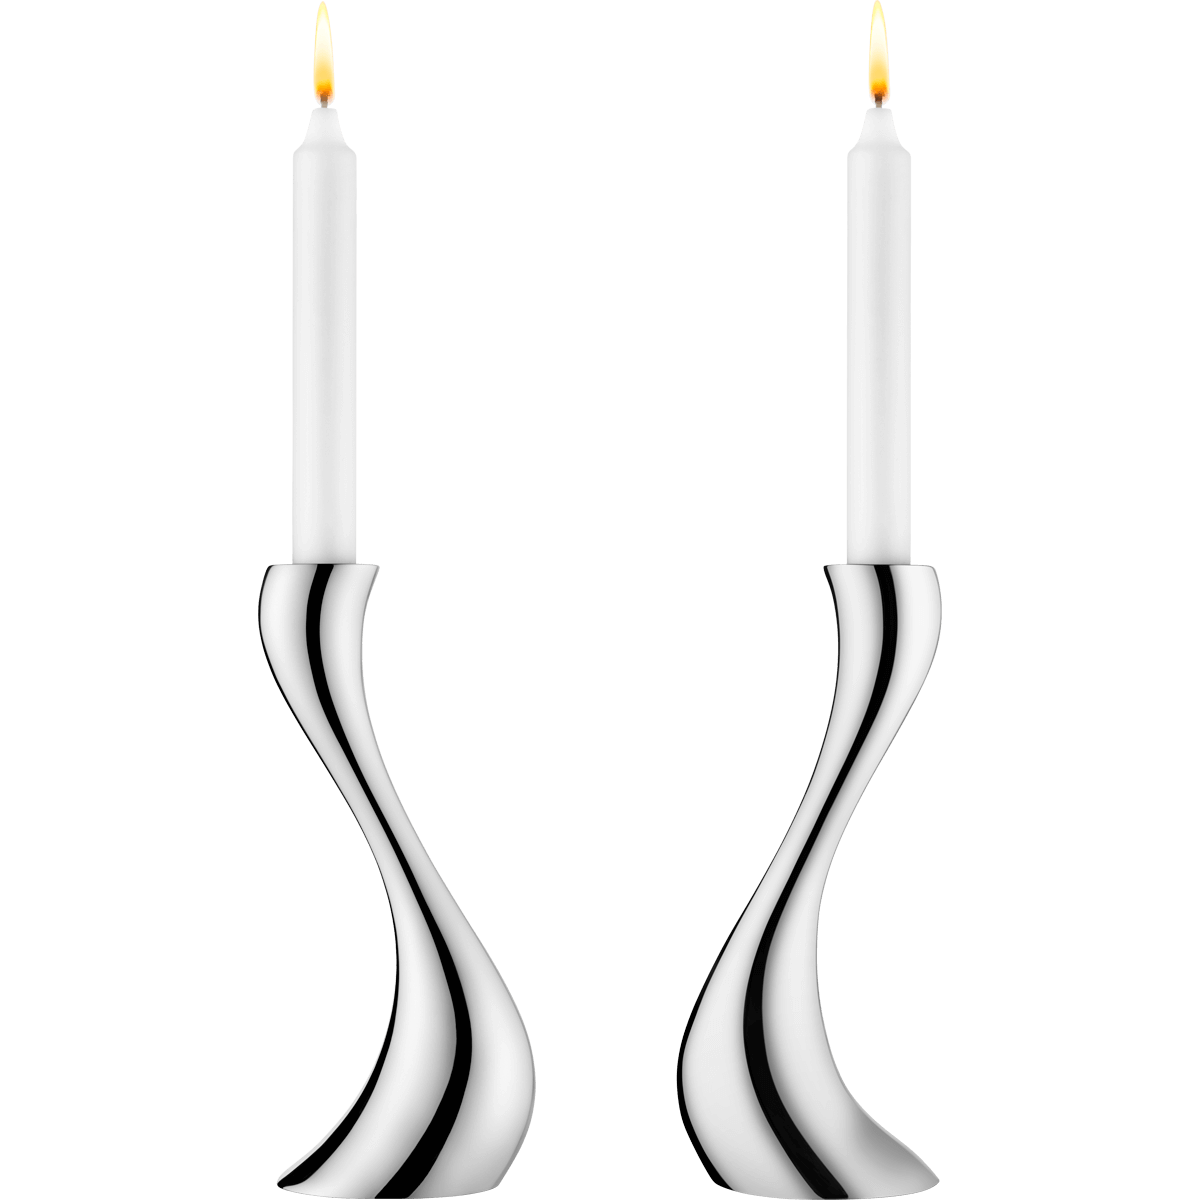 georg jensen cobra candle holders set of 2 mirror finish stainless steel 3586579